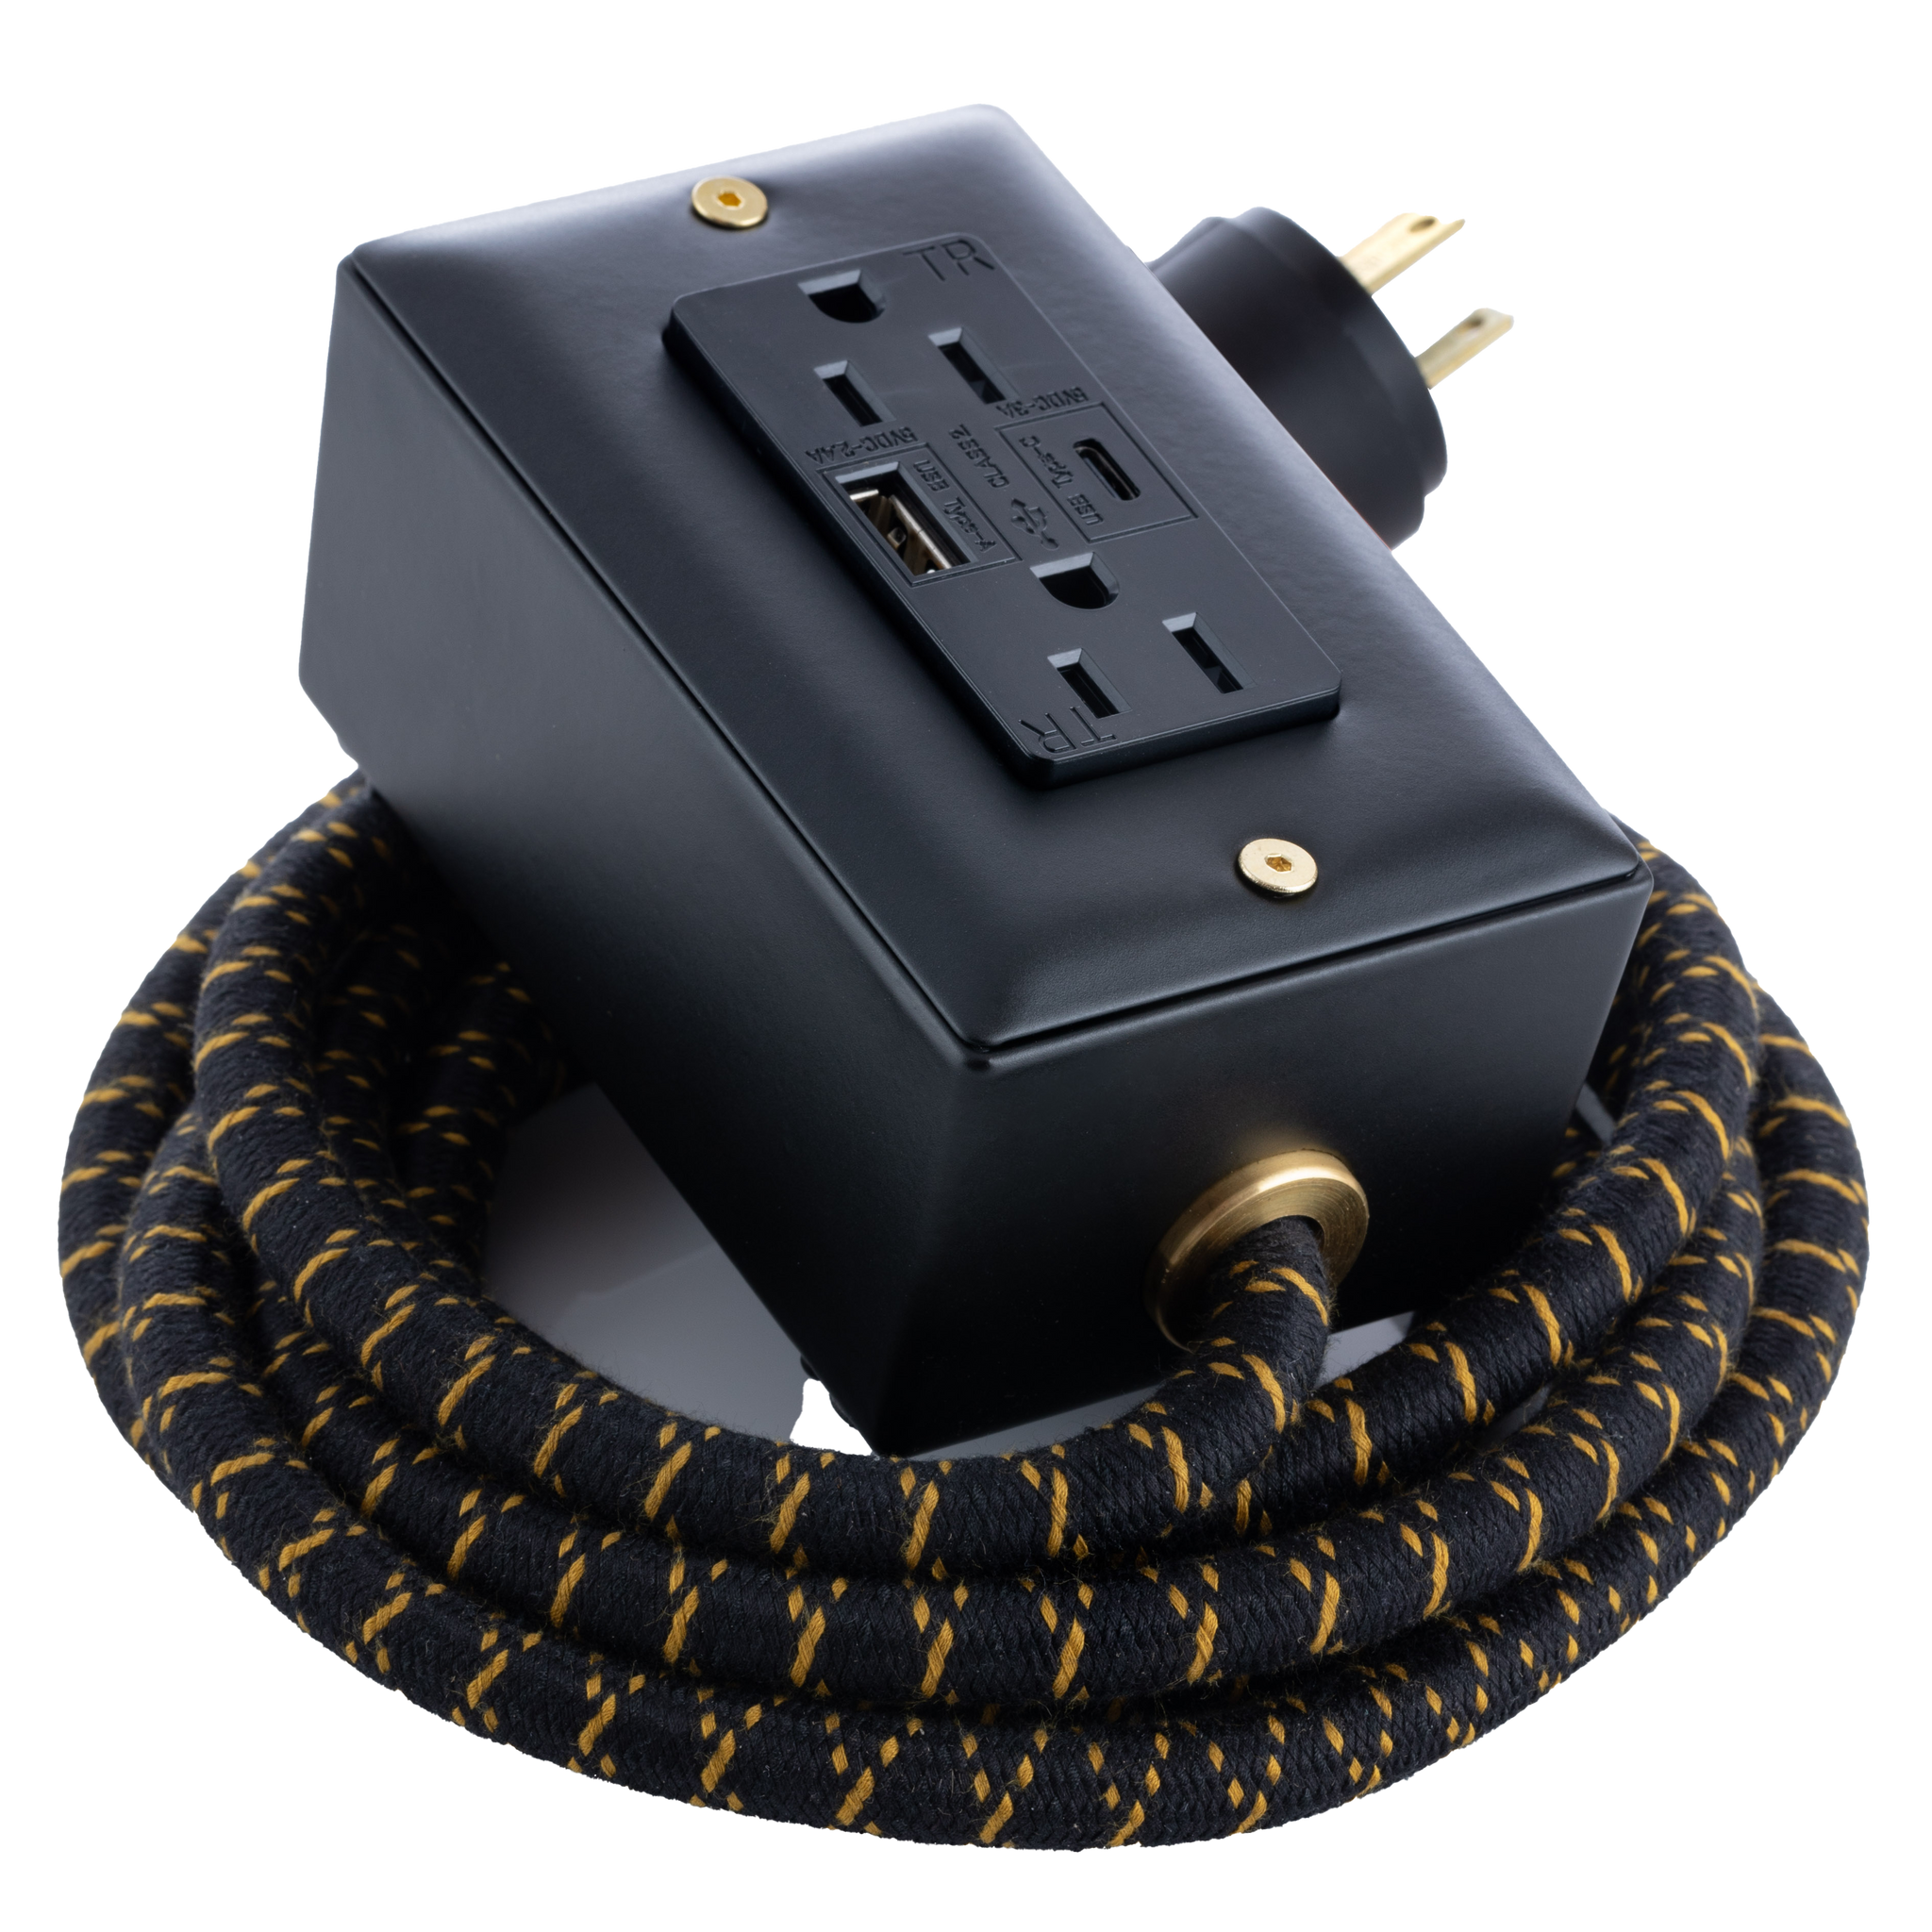 Extō Smart ChipUSB Type C® - The First Smart Chip USB C Power Cord -  Carrara Matte Black & Brass - The Conway Electric Store